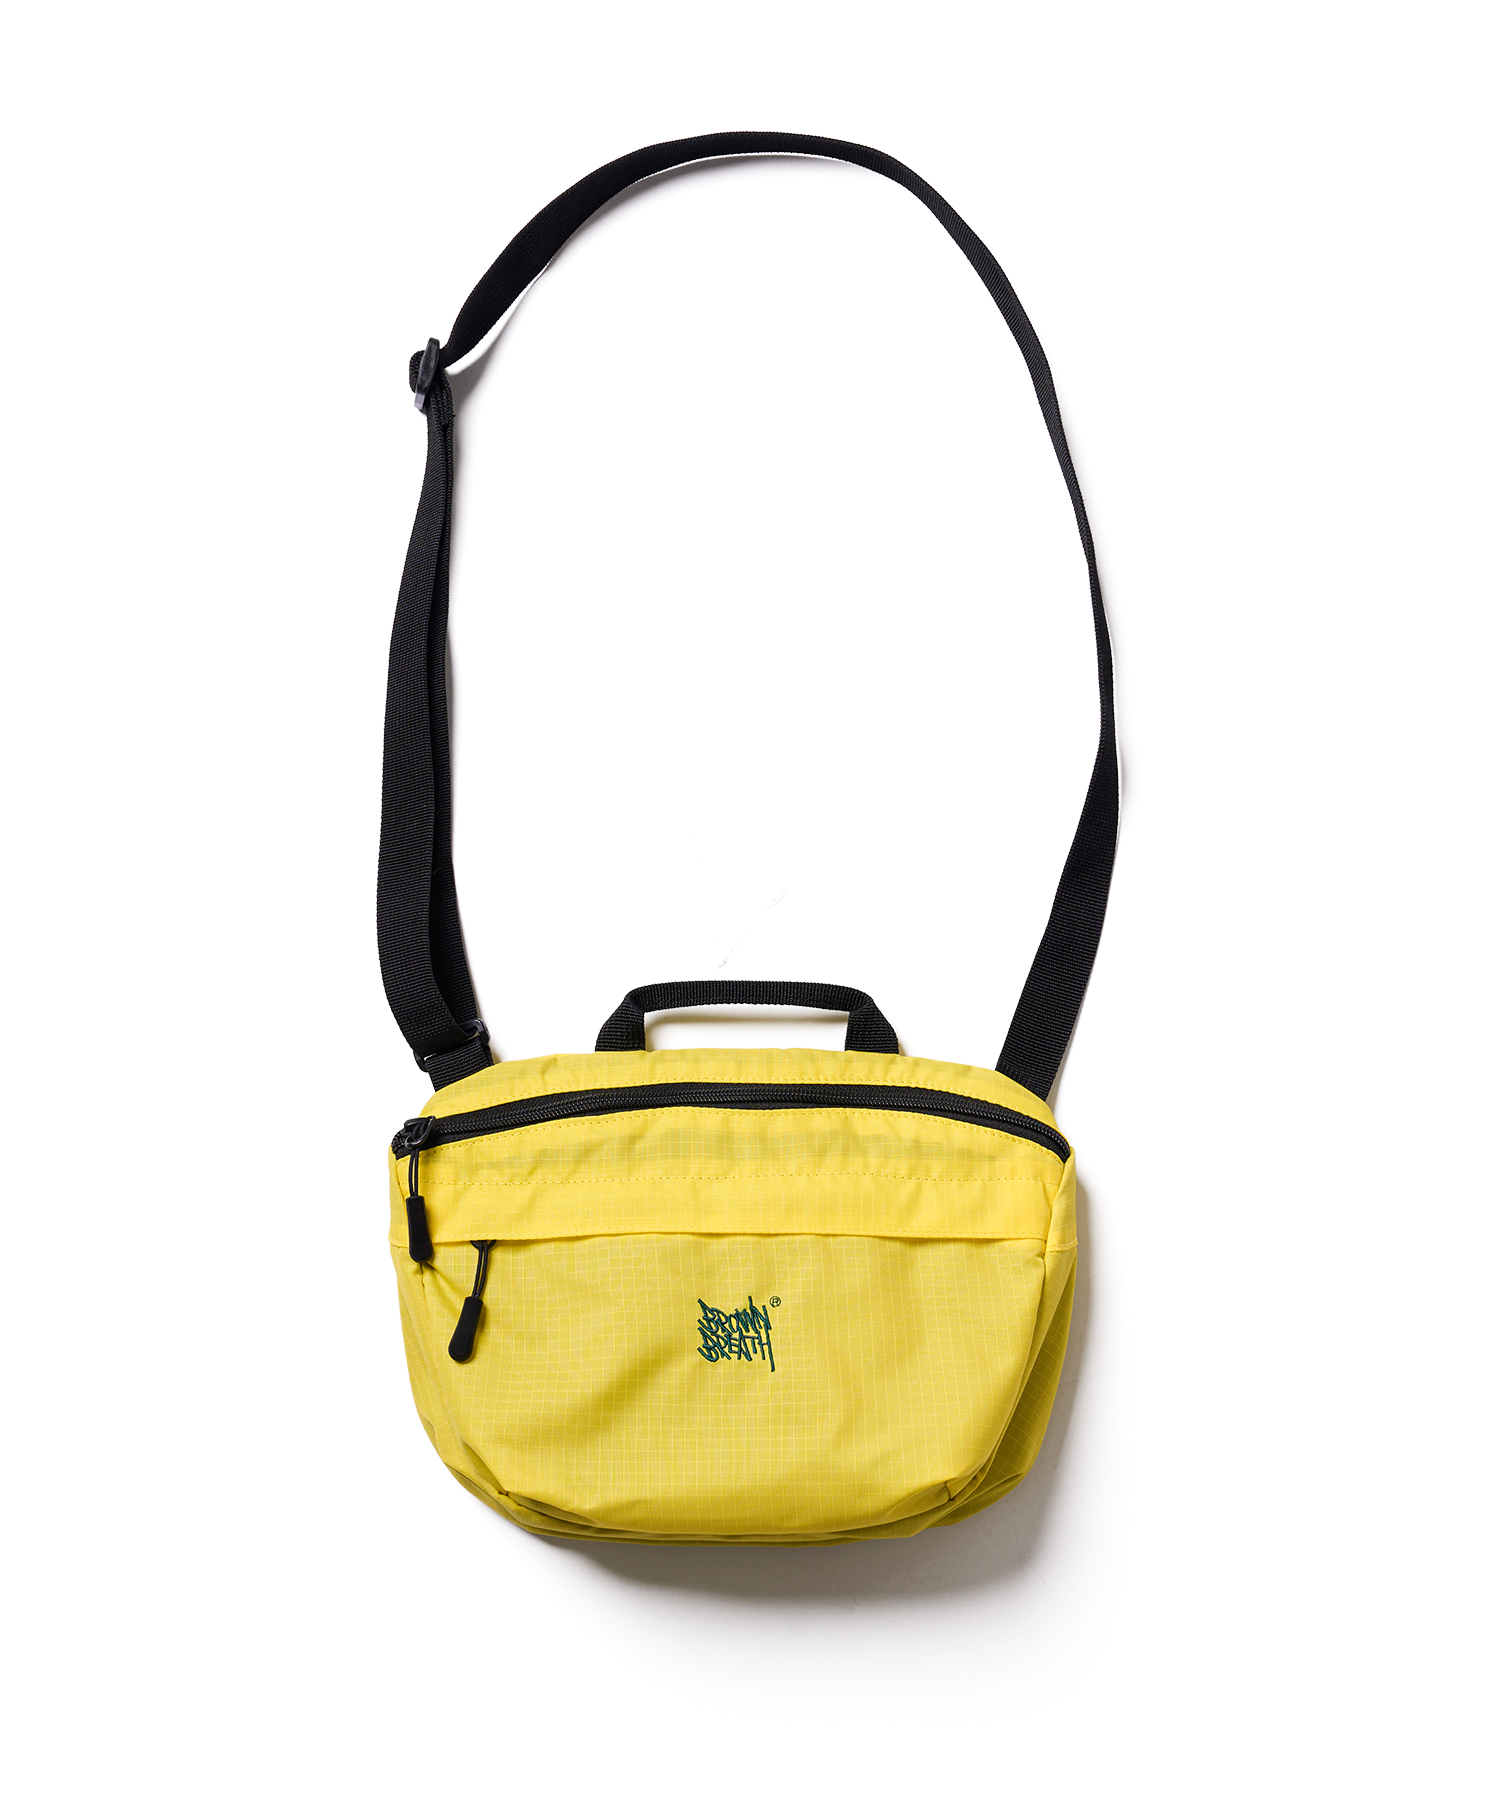 ACTS CROSS BAG - YELLOW GREEN brownbreath